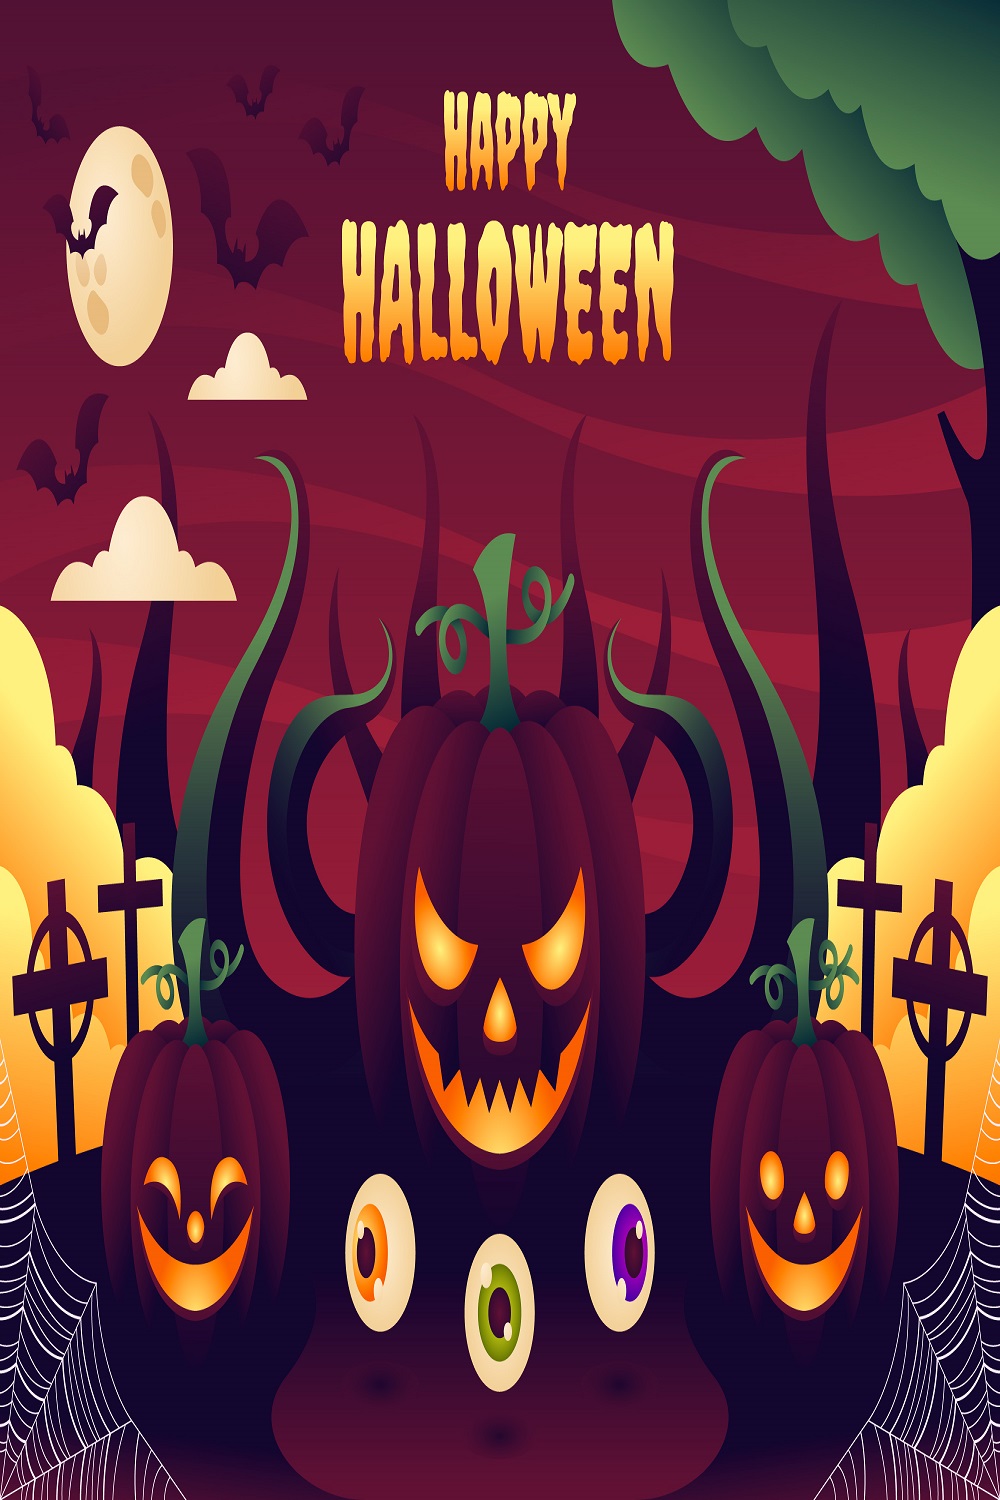 Realistic background Halloween celebration pinterest preview image.